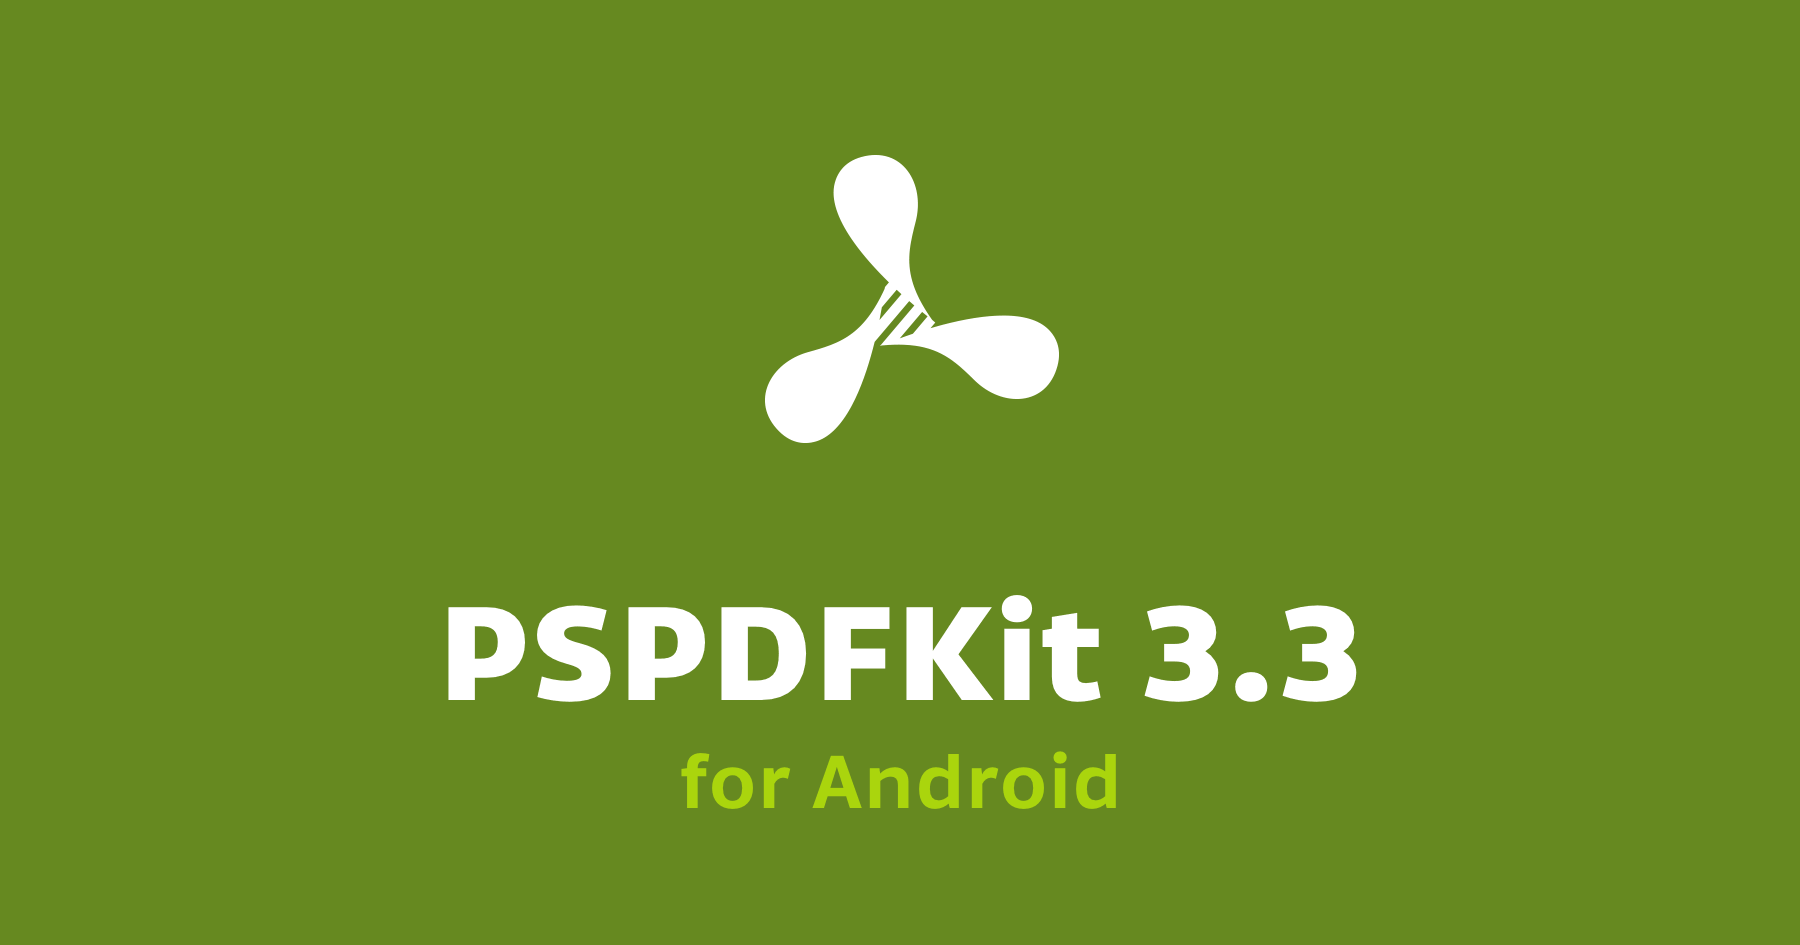 Illustration: PSPDFKit 3.3 for Android